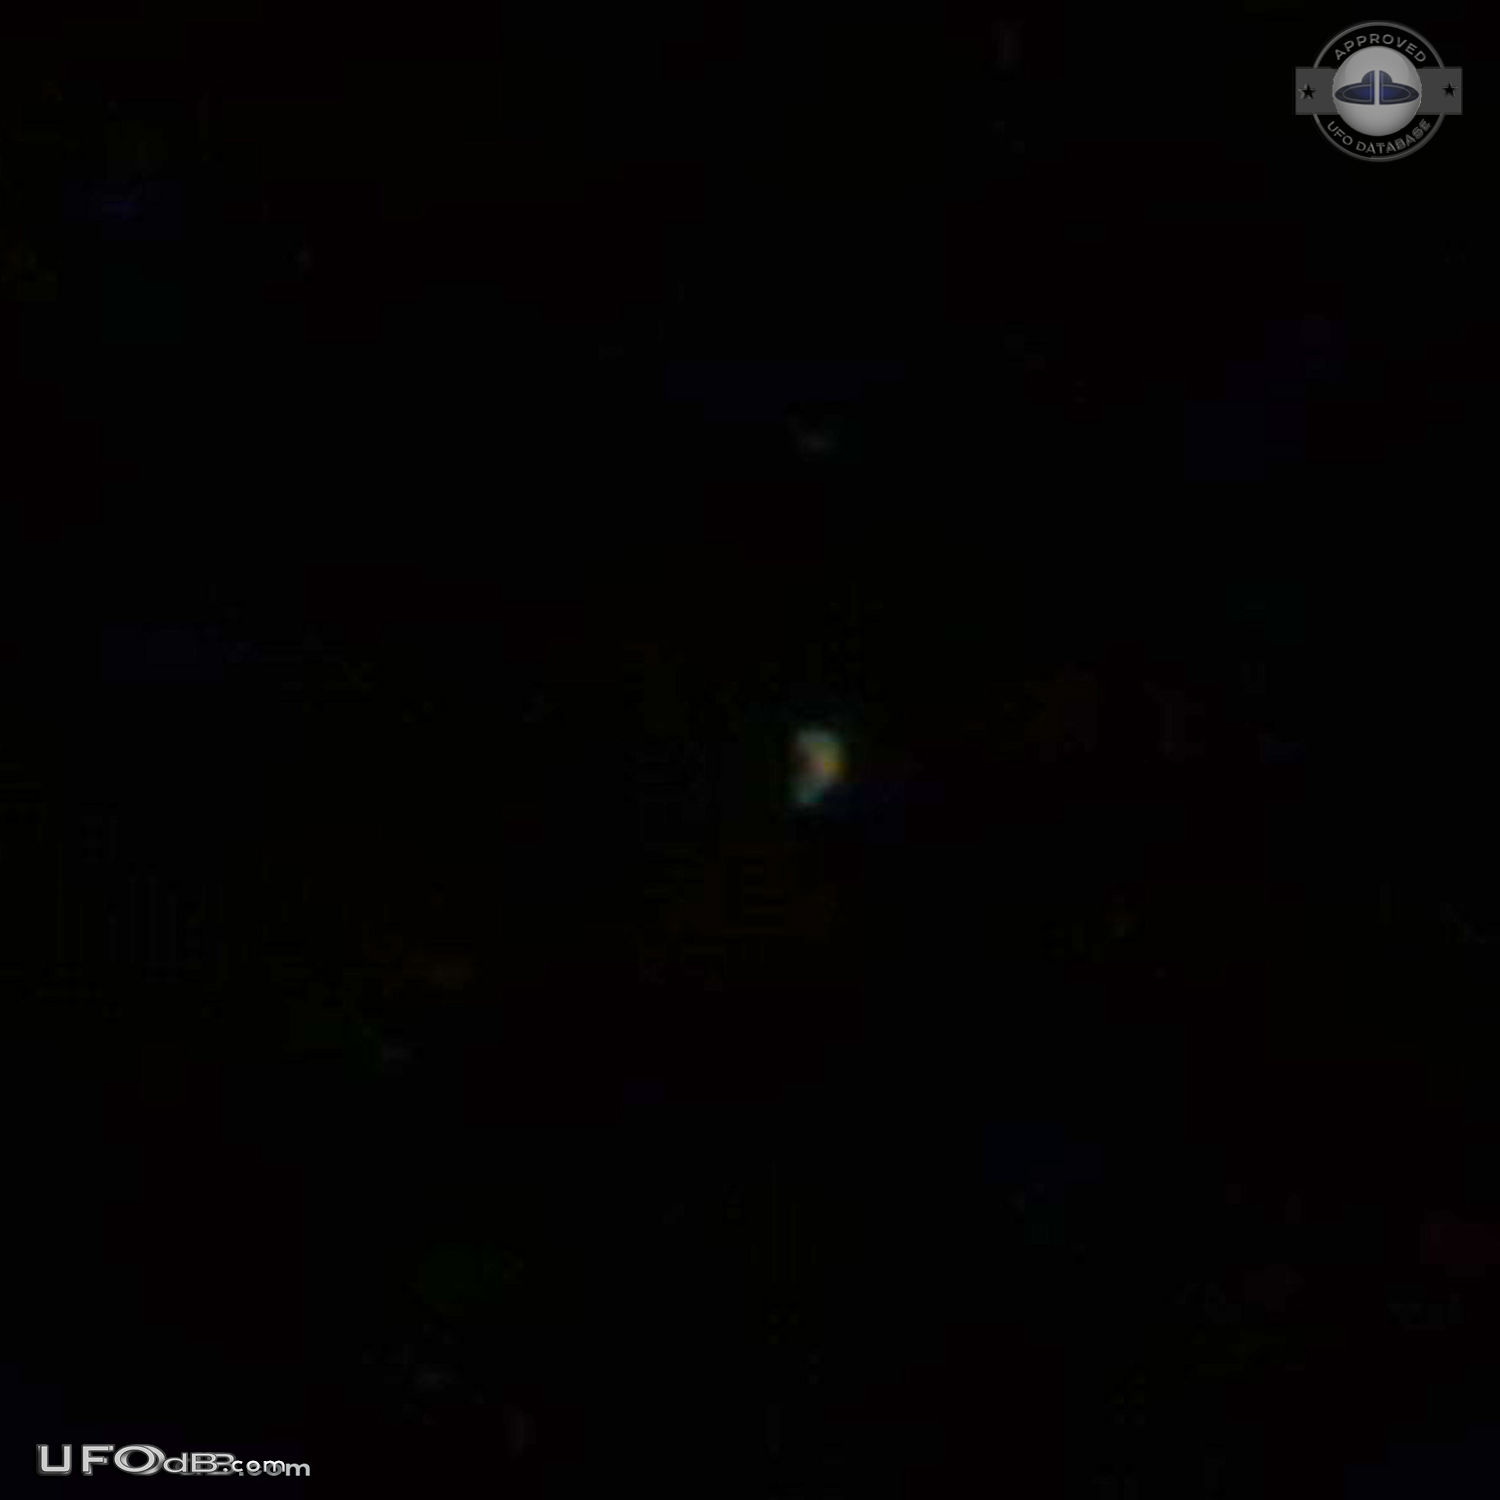 Incredible UFO sighting with pictures & details - Troyan Bulgaria 2010 UFO Picture #464-7